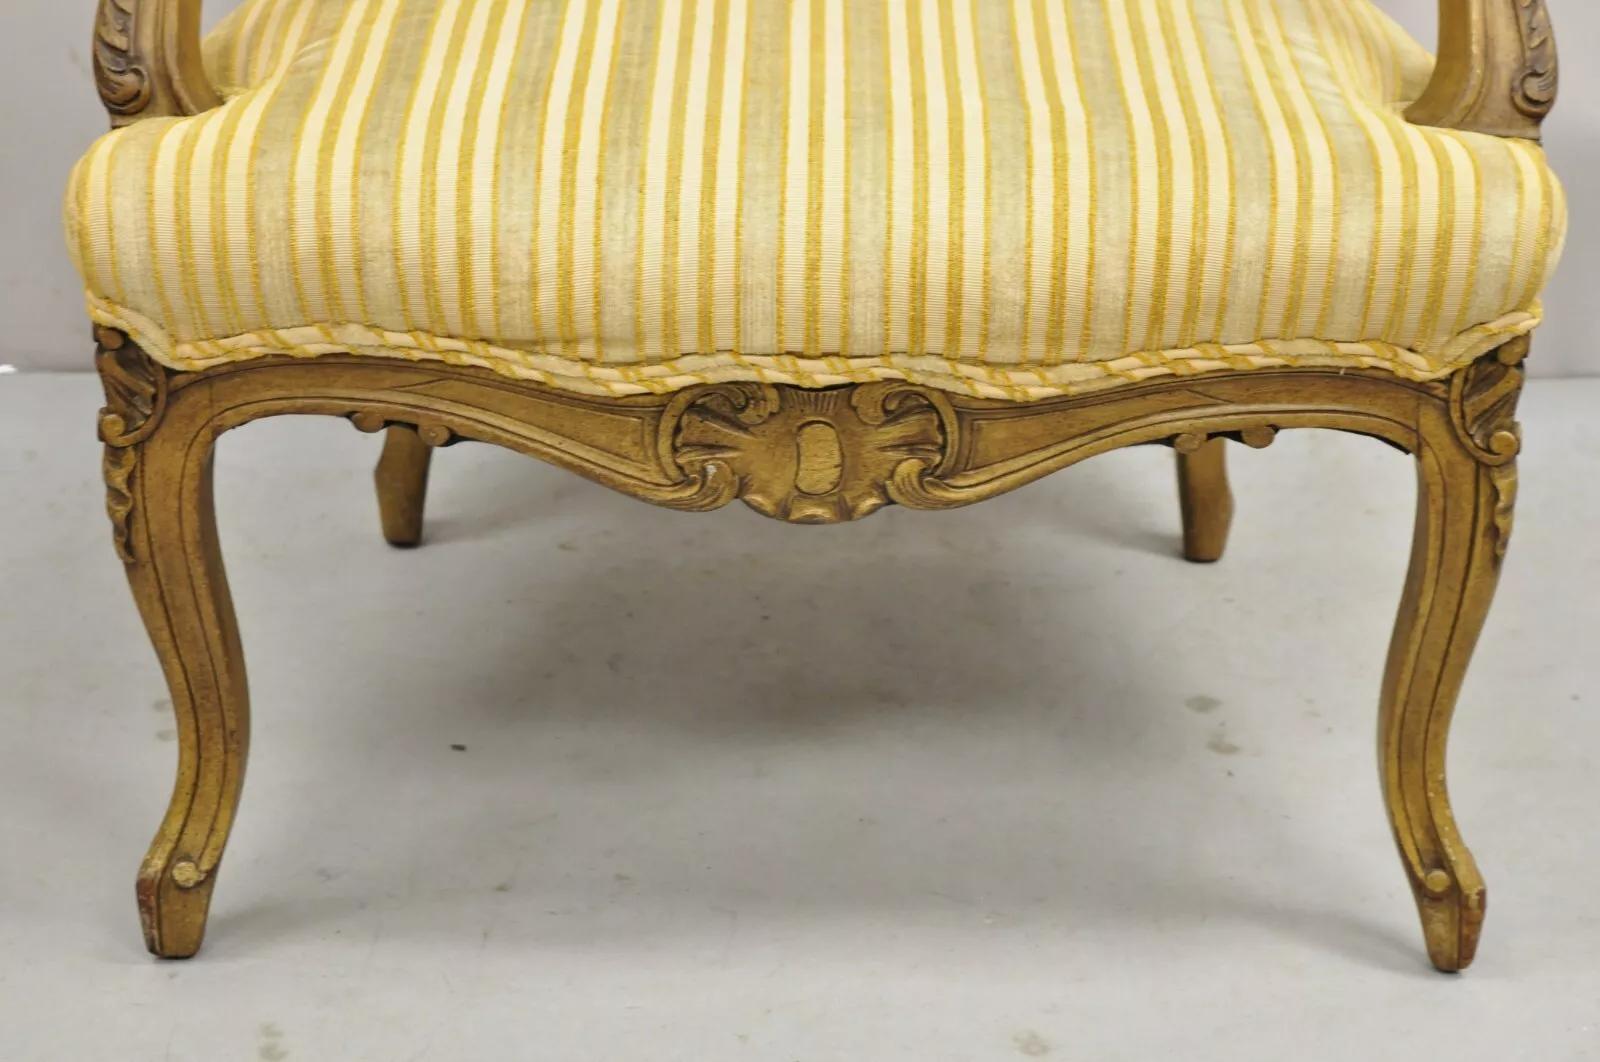 20th Century Vintage French Louis XV Style Carved Walnut Fauteuil Parlor Lounge Arm Chair For Sale